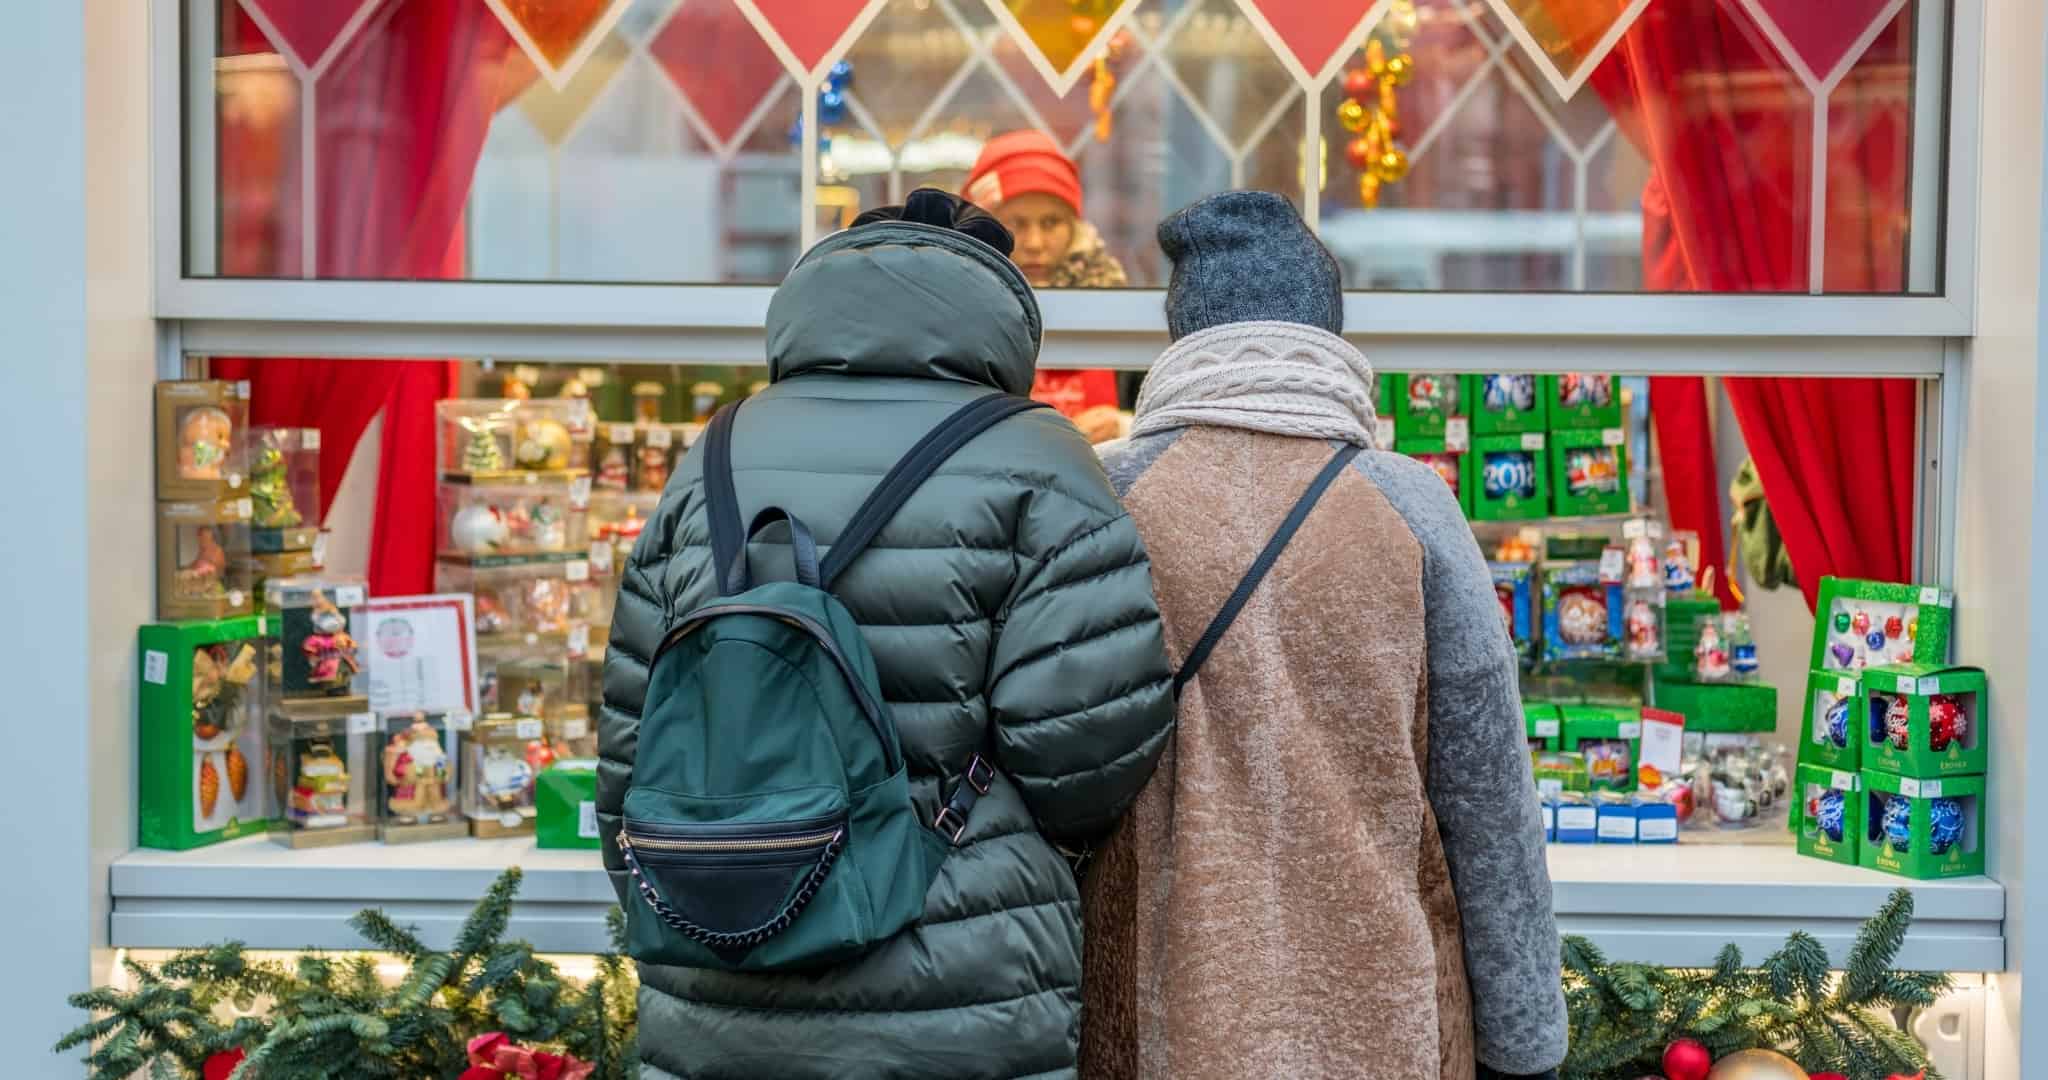 Couple in front of Christmas shop window buying gifts